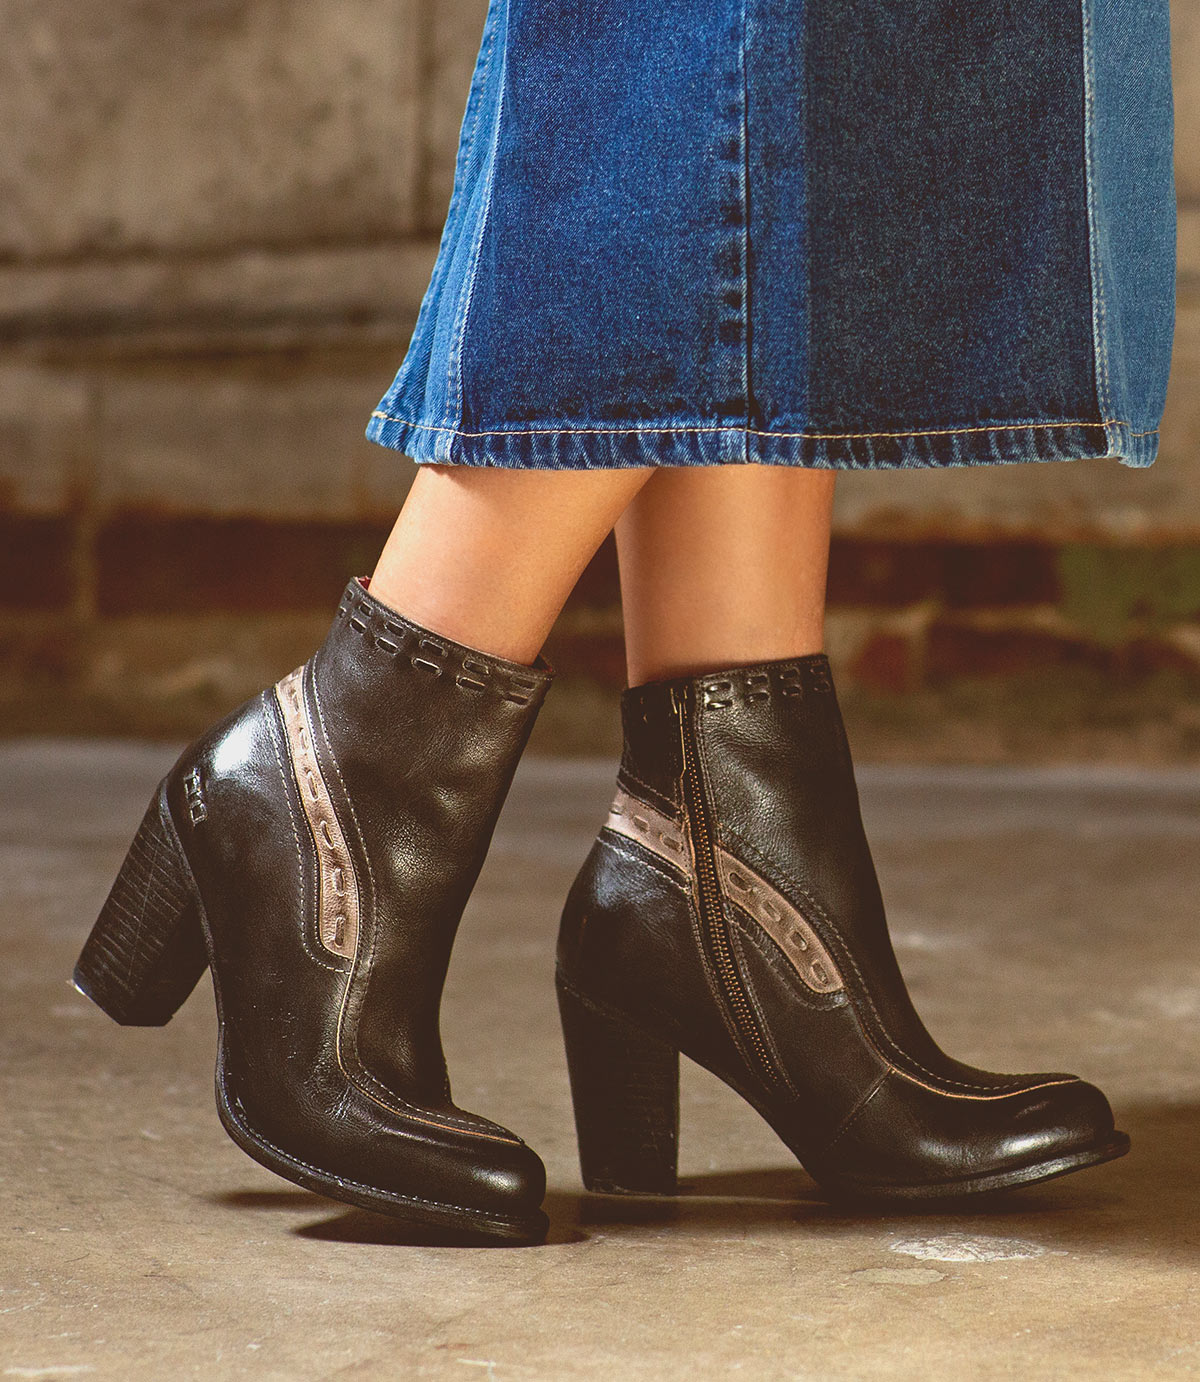 A woman in a denim skirt is wearing Bed Stu leather ankle boots.